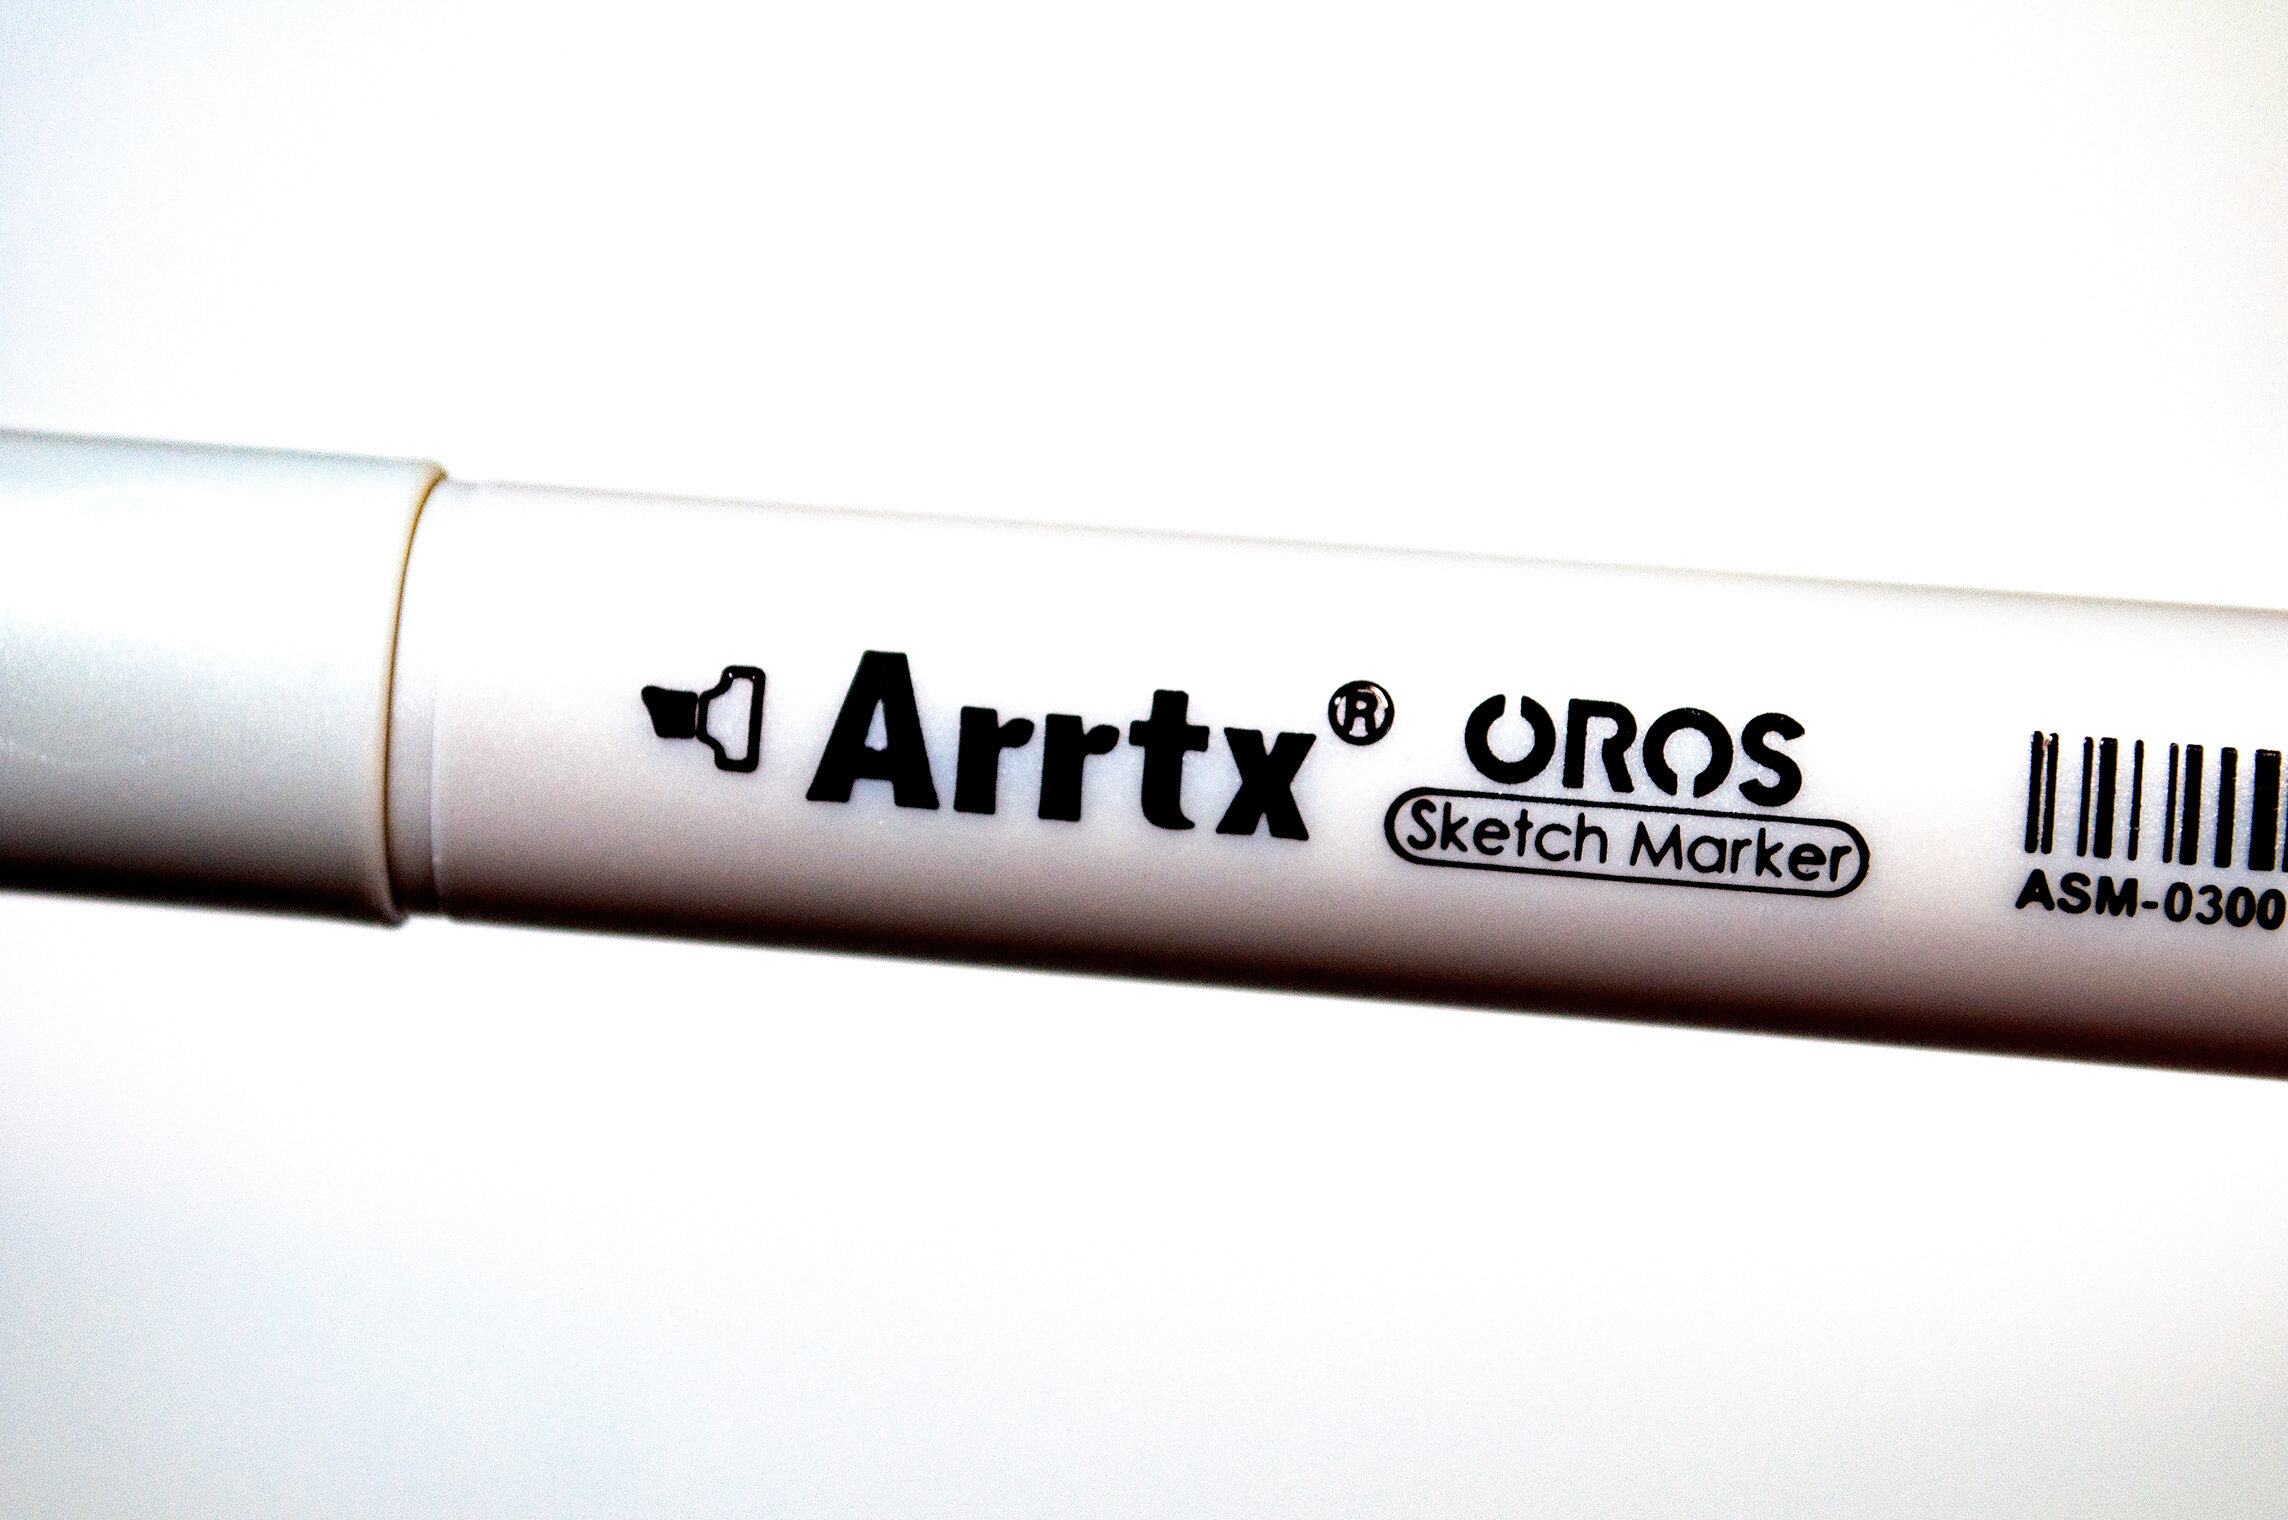 Arrtx Complete Marker Range And Rectifying A Mistake On My Part